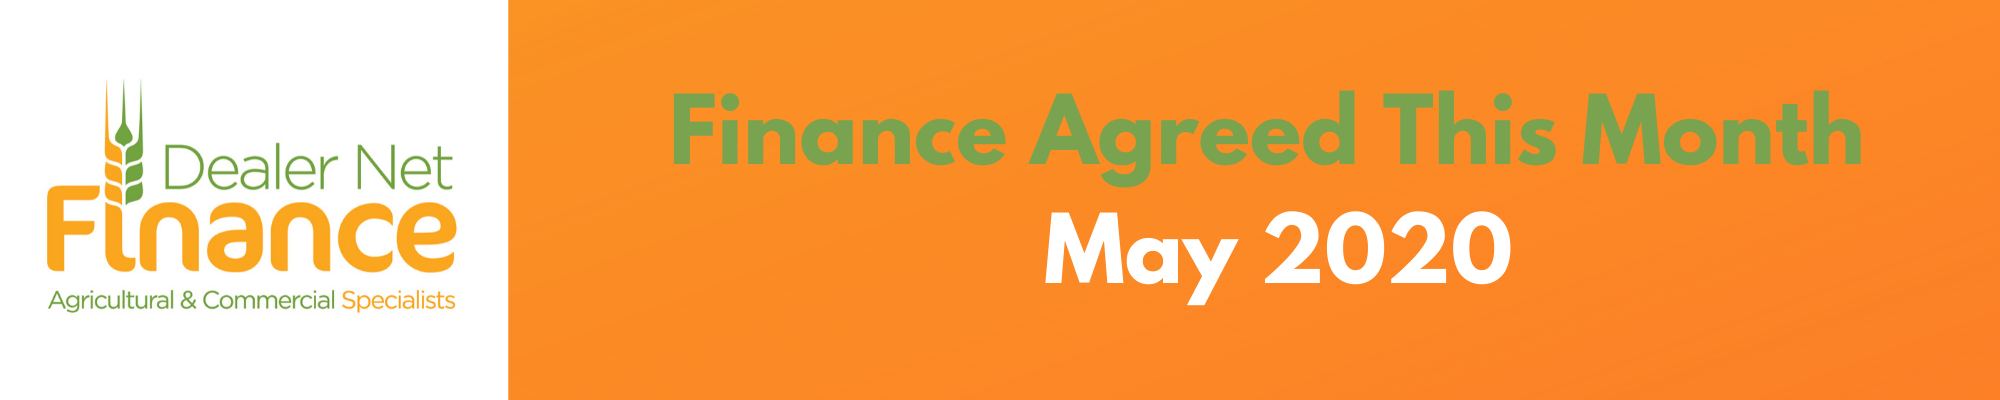 Finance Agreed This Month – May 2020